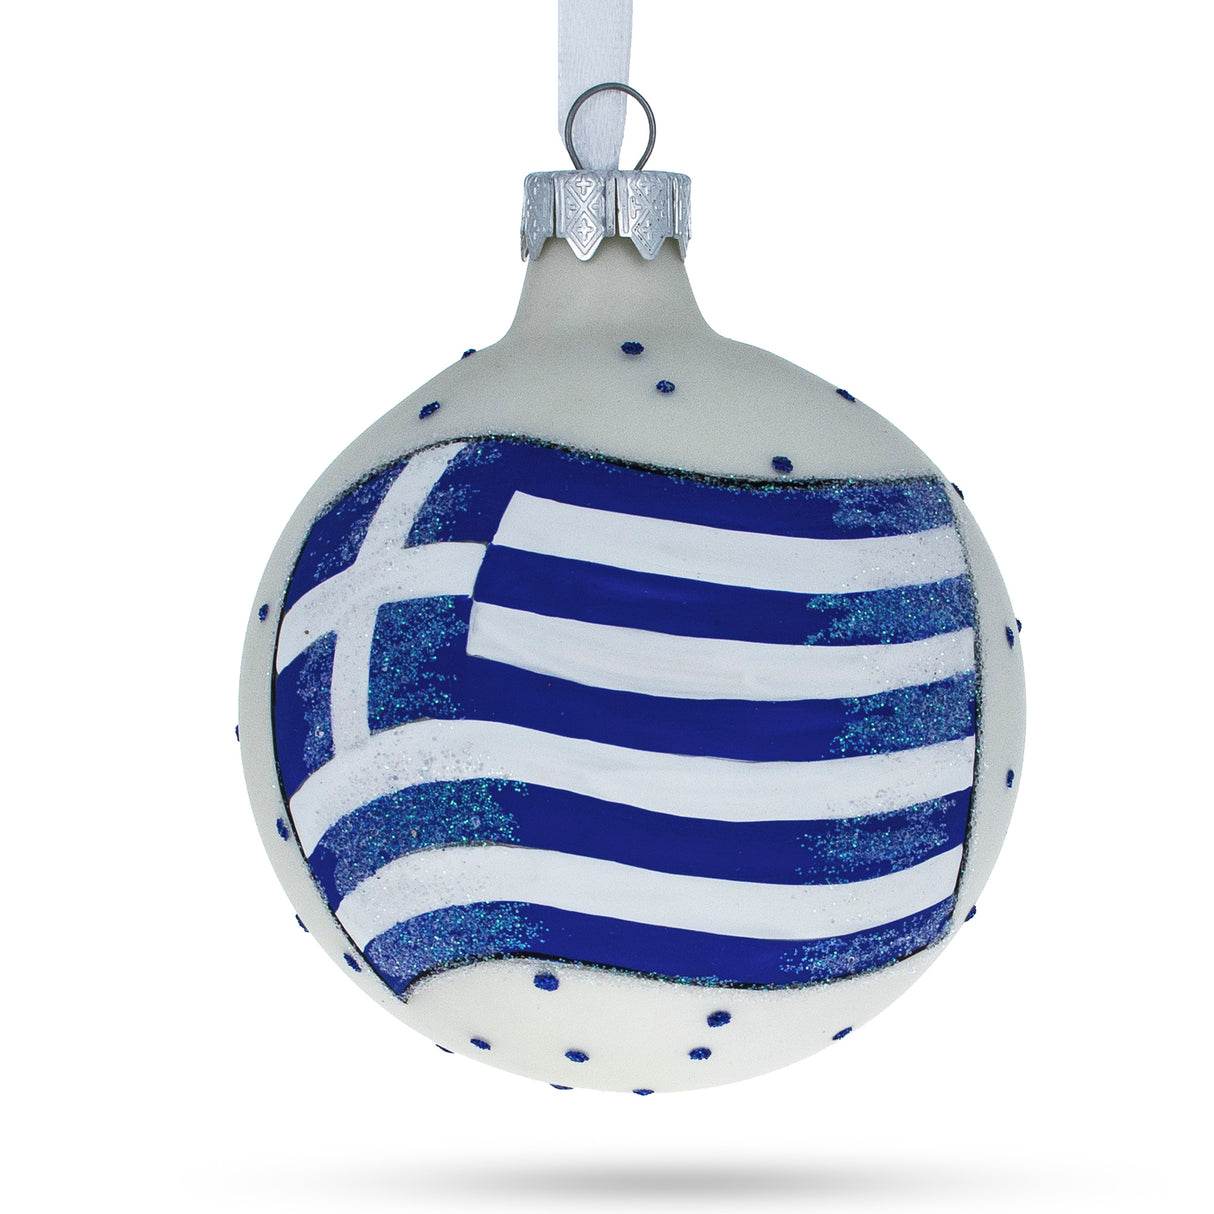 Flag of Greece Blown Glass Ball Christmas Ornament 3.25 Inches in Blue color, Round shape